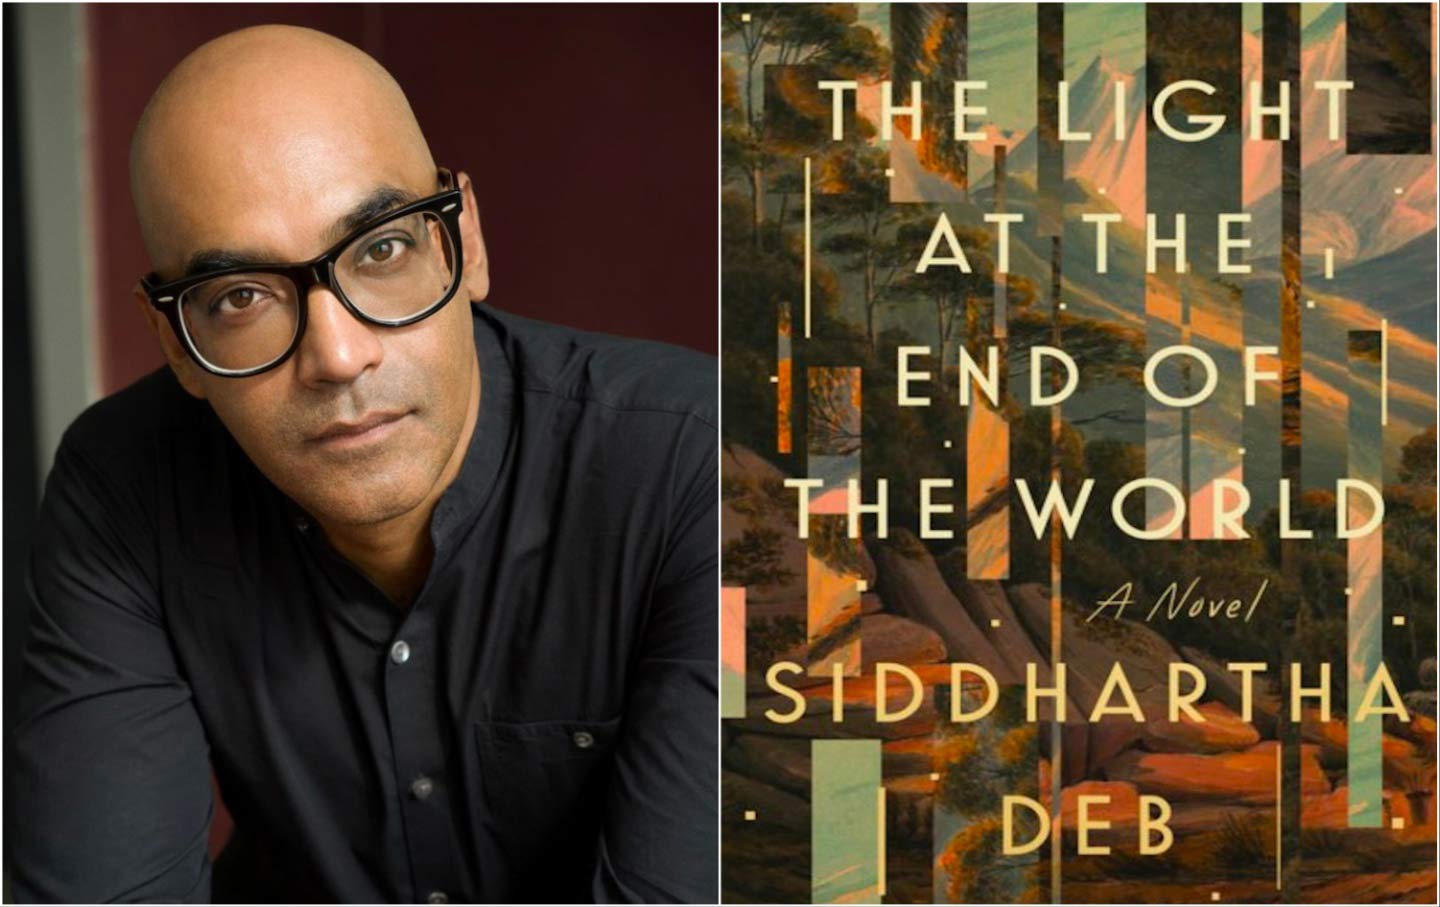 Siddhartha Deb, “The Light at the End of the World”